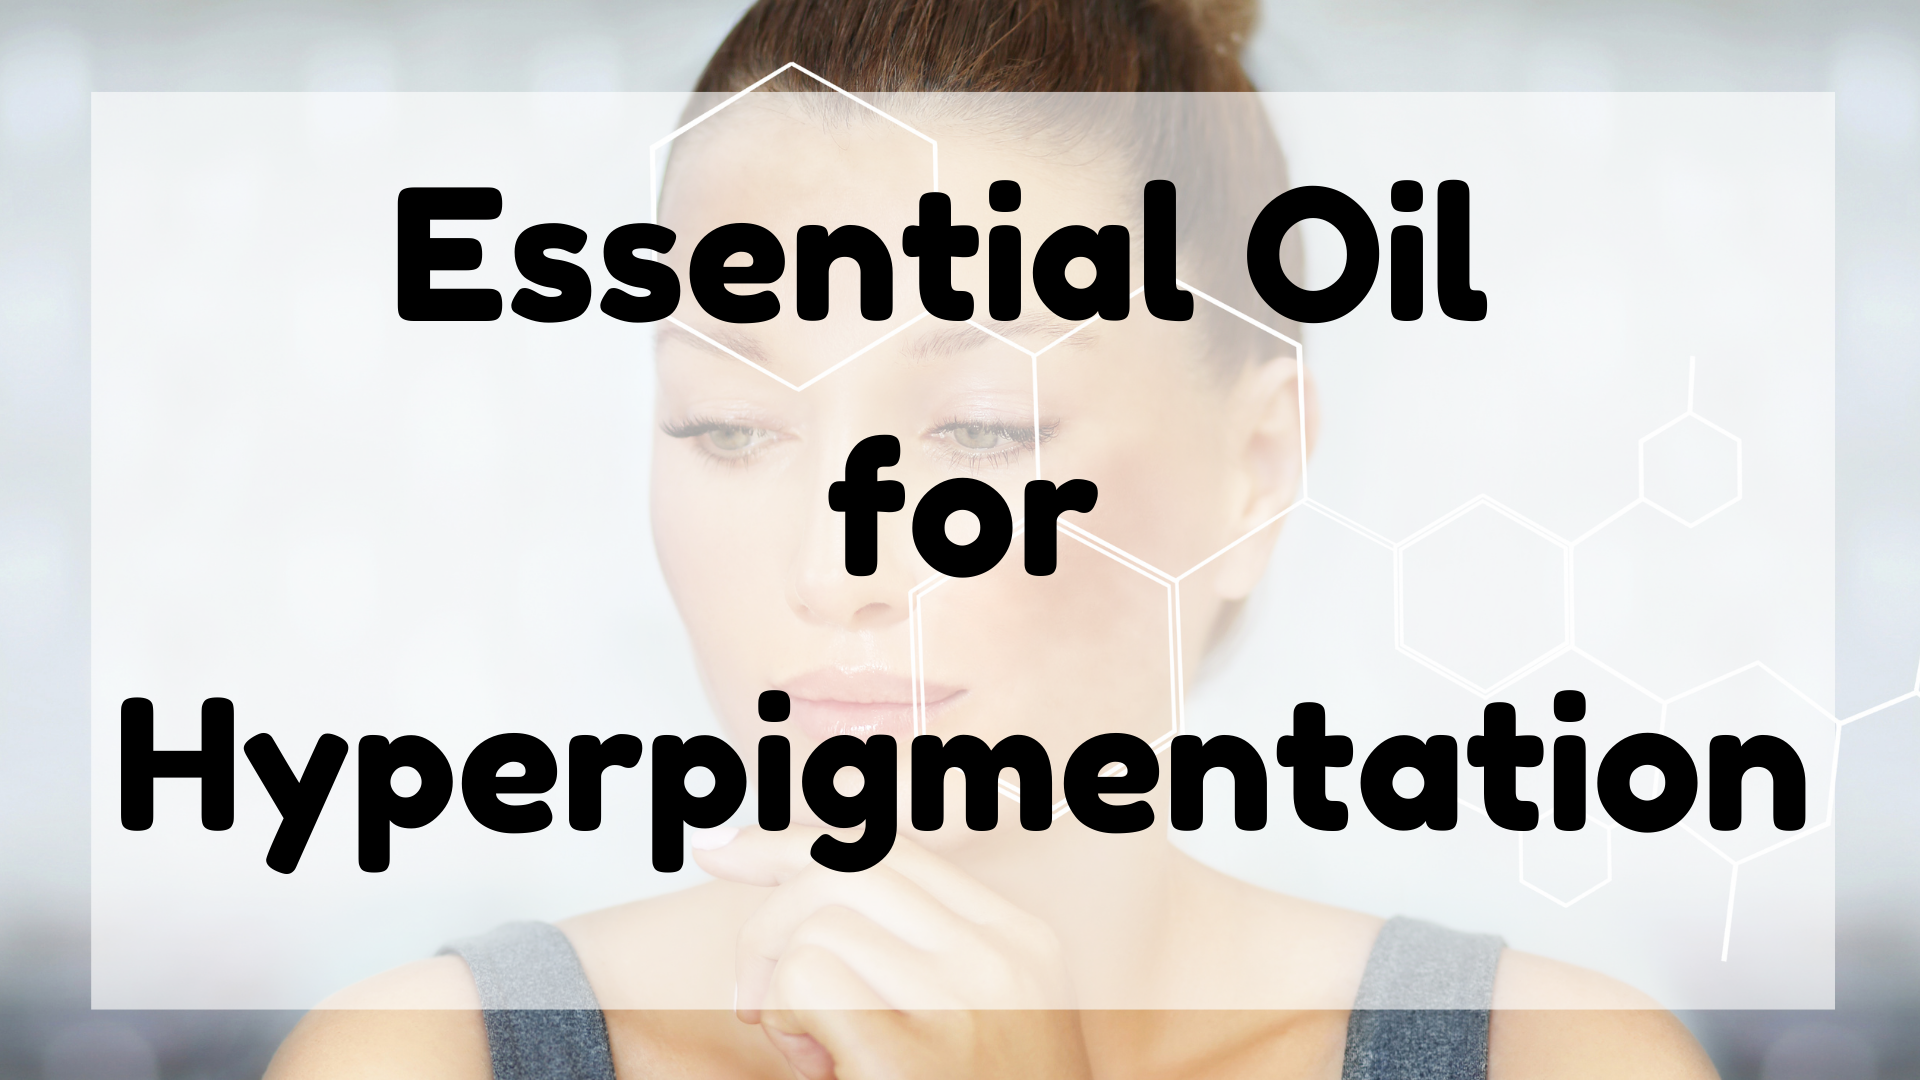 Essential Oil for Hyperpigmentation featured image